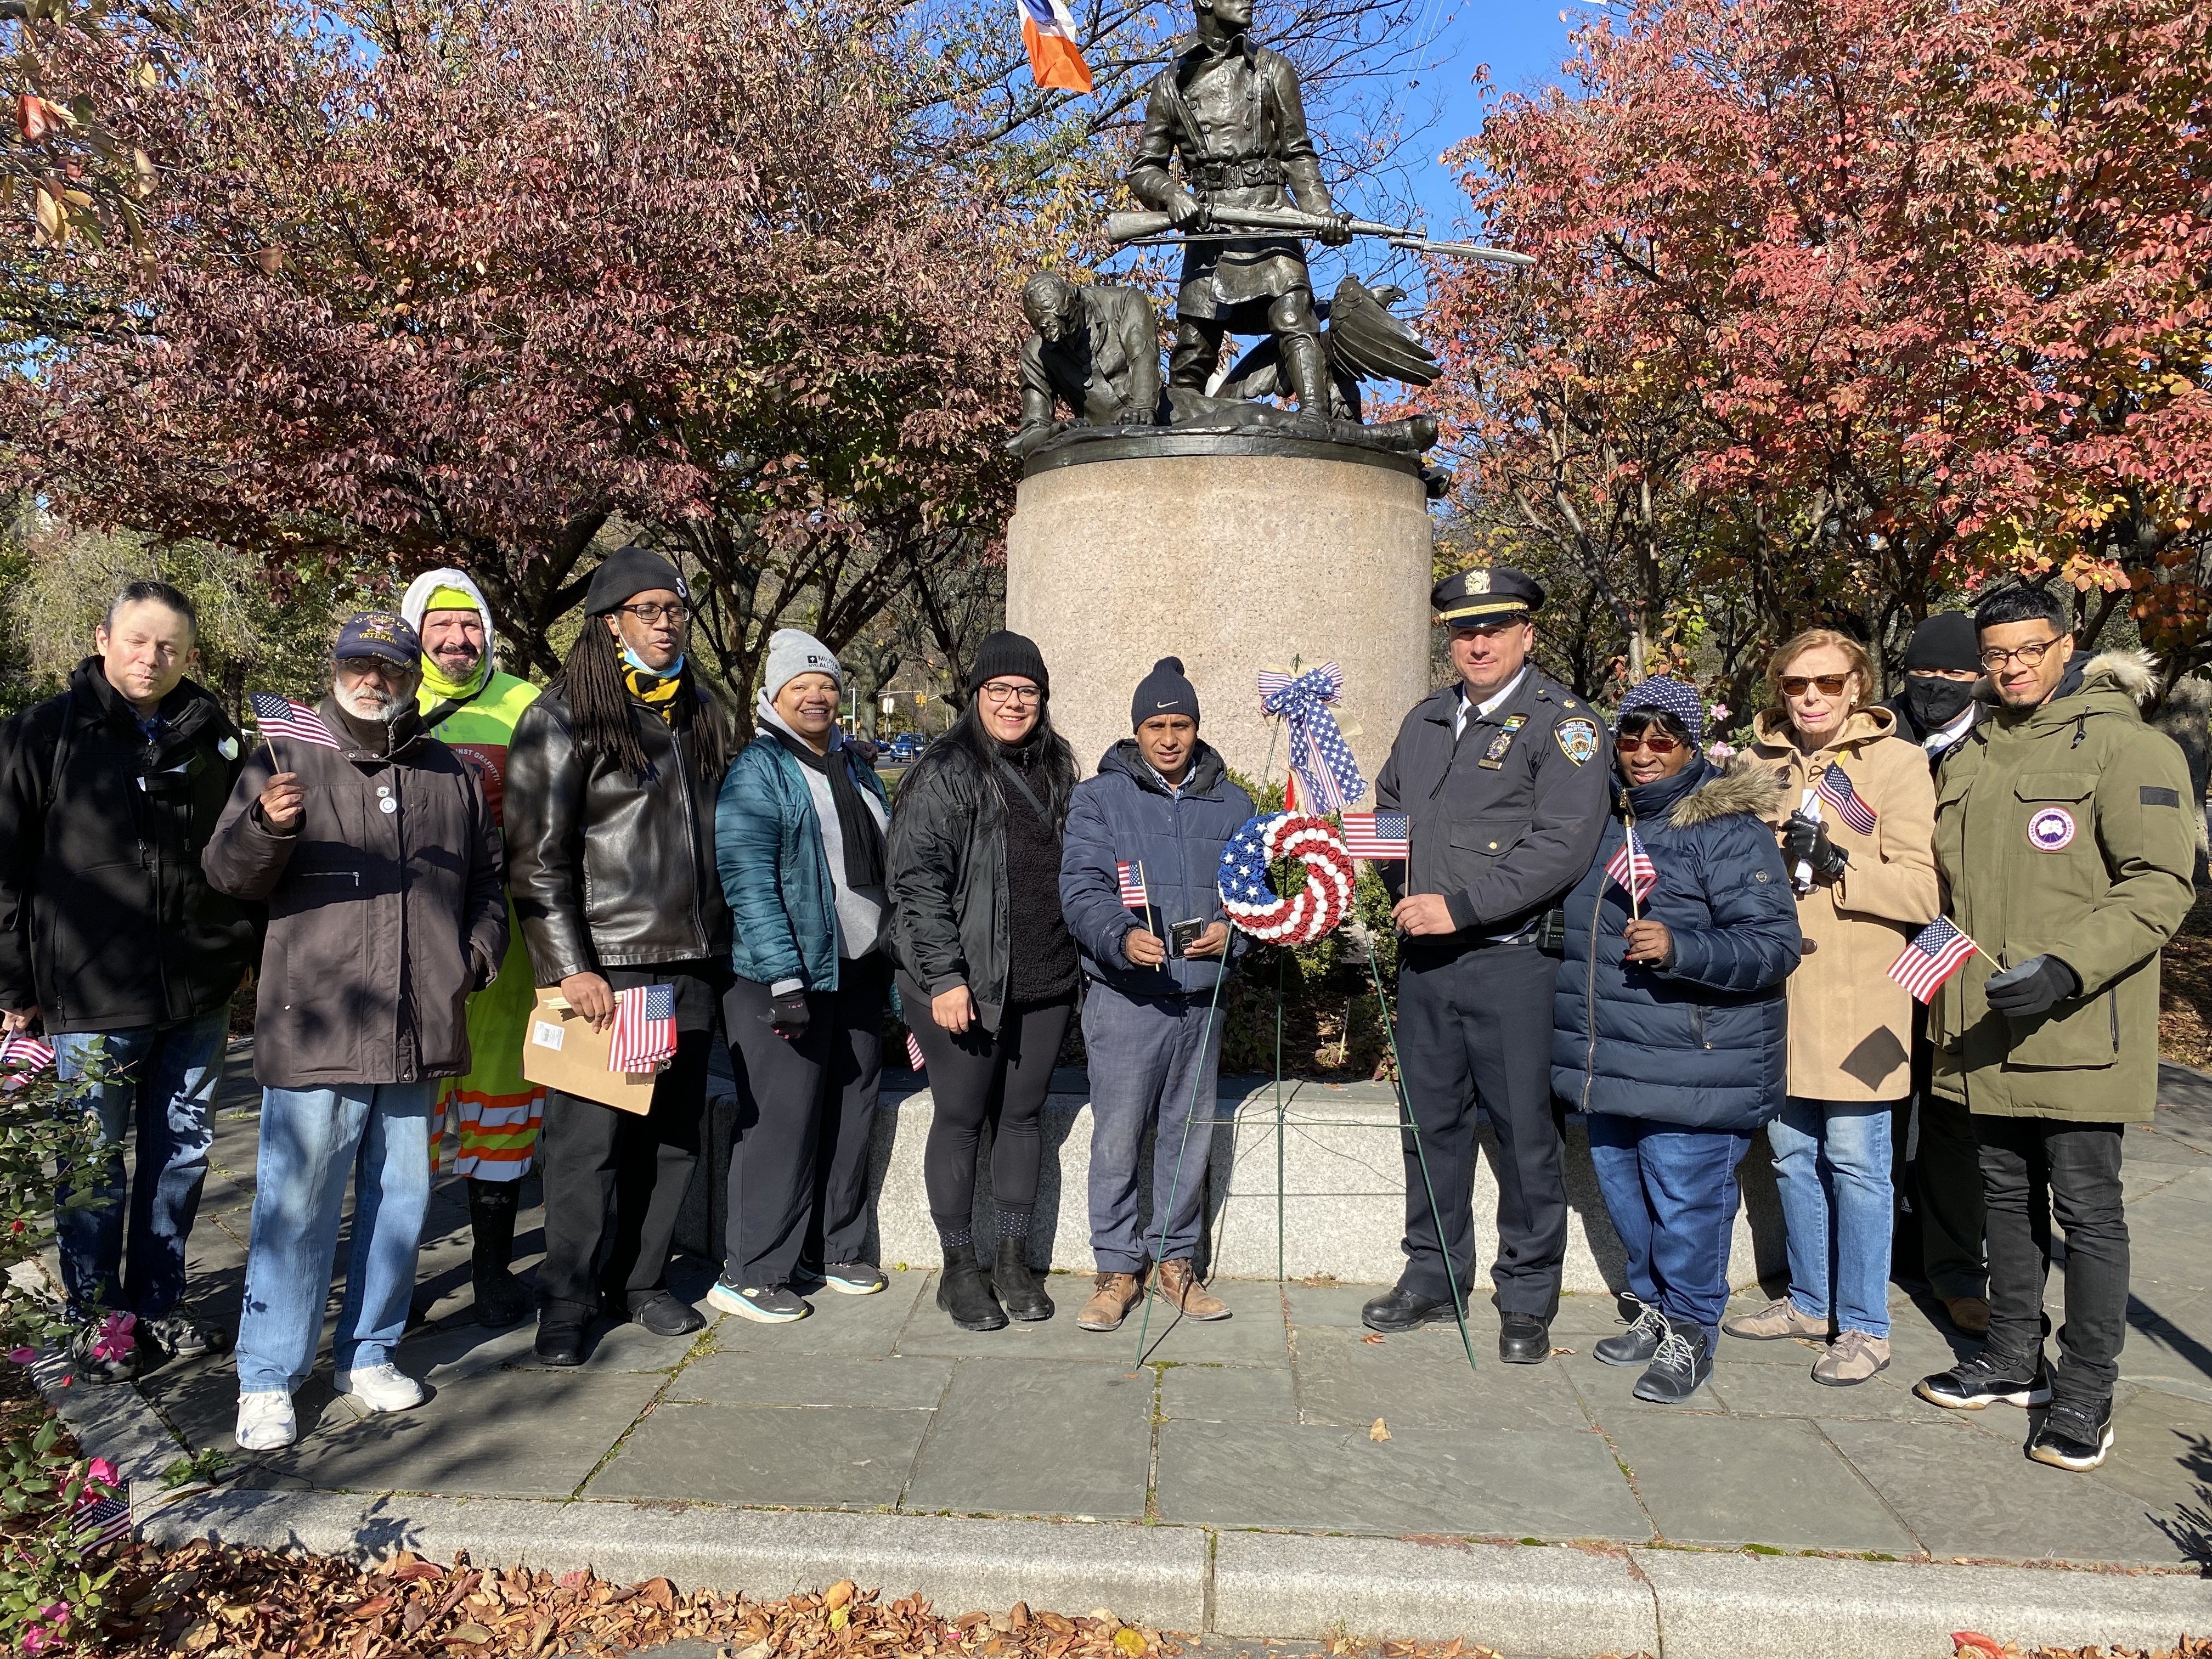 Group of BXCB7 members standing and smiling in front of statue
                                           